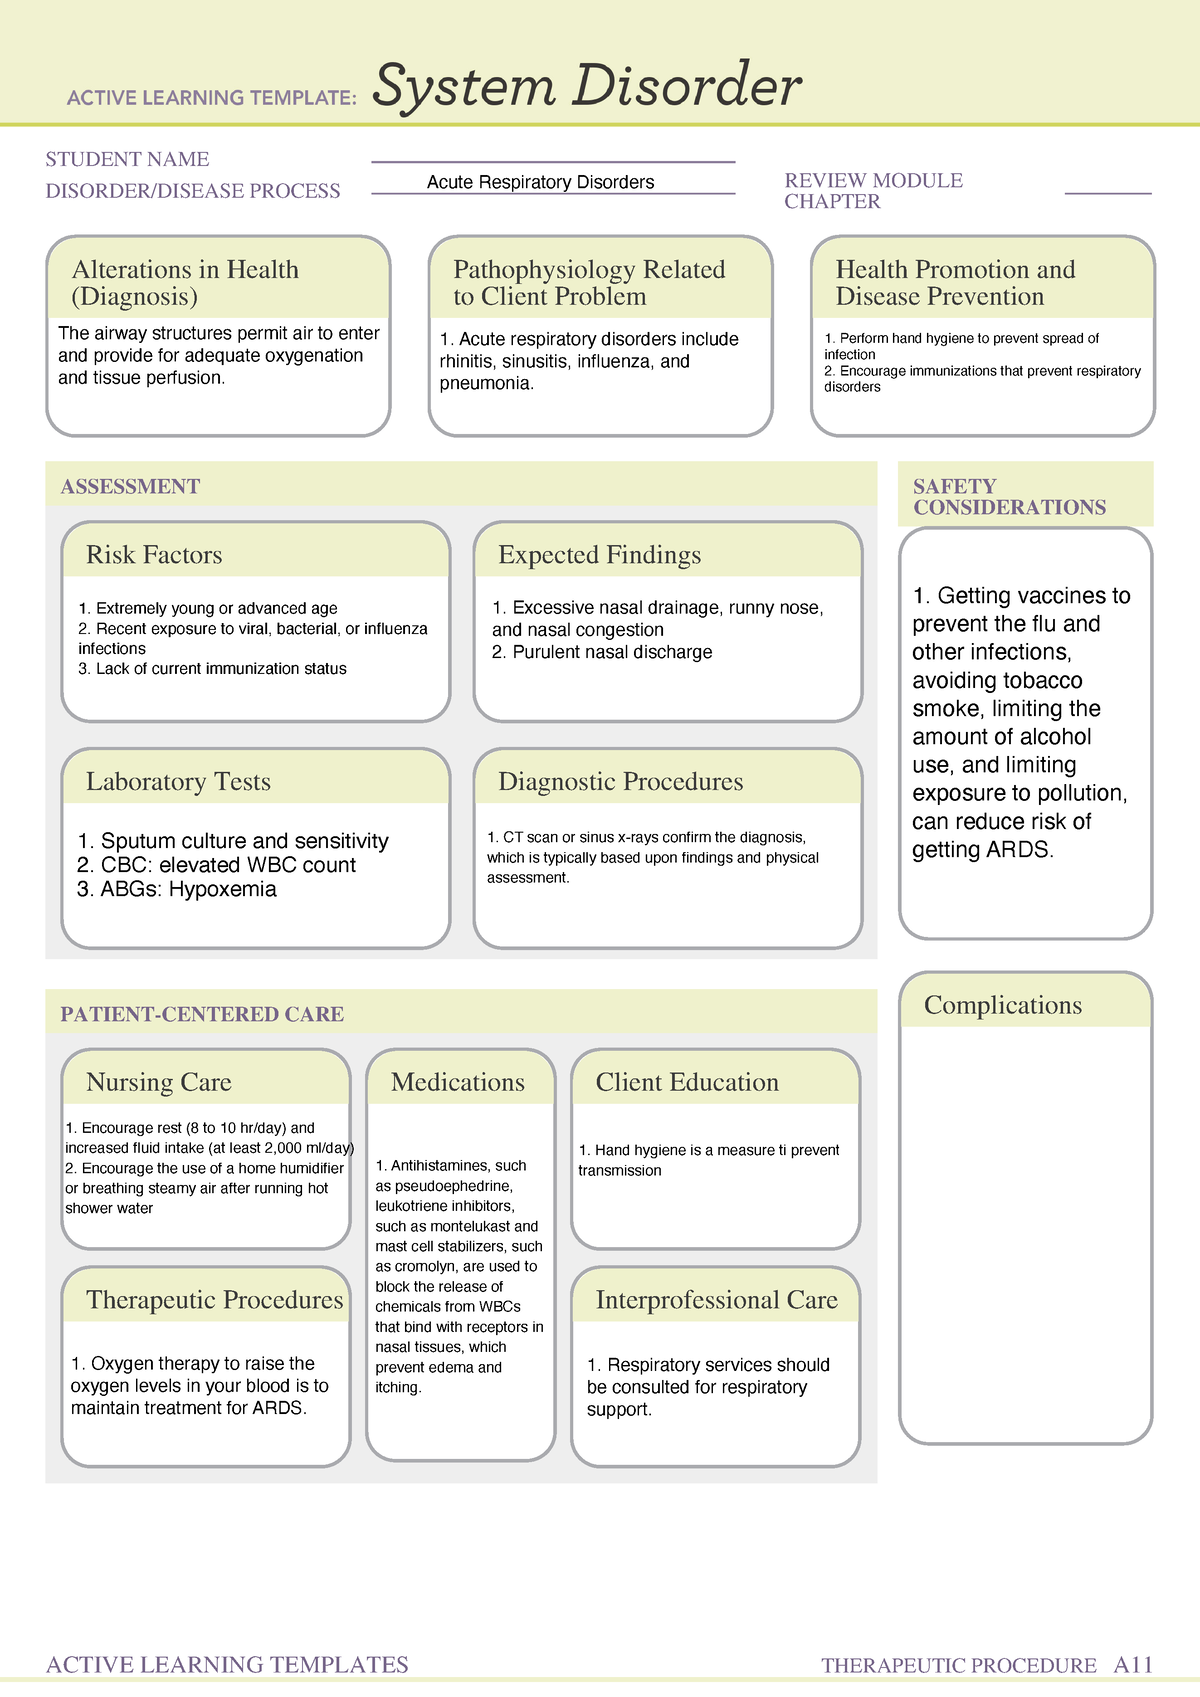 REMEDIATION TEMPLATE ASSIGNMENT FOR MED/SURG OR PHARM - NURS 303 ...